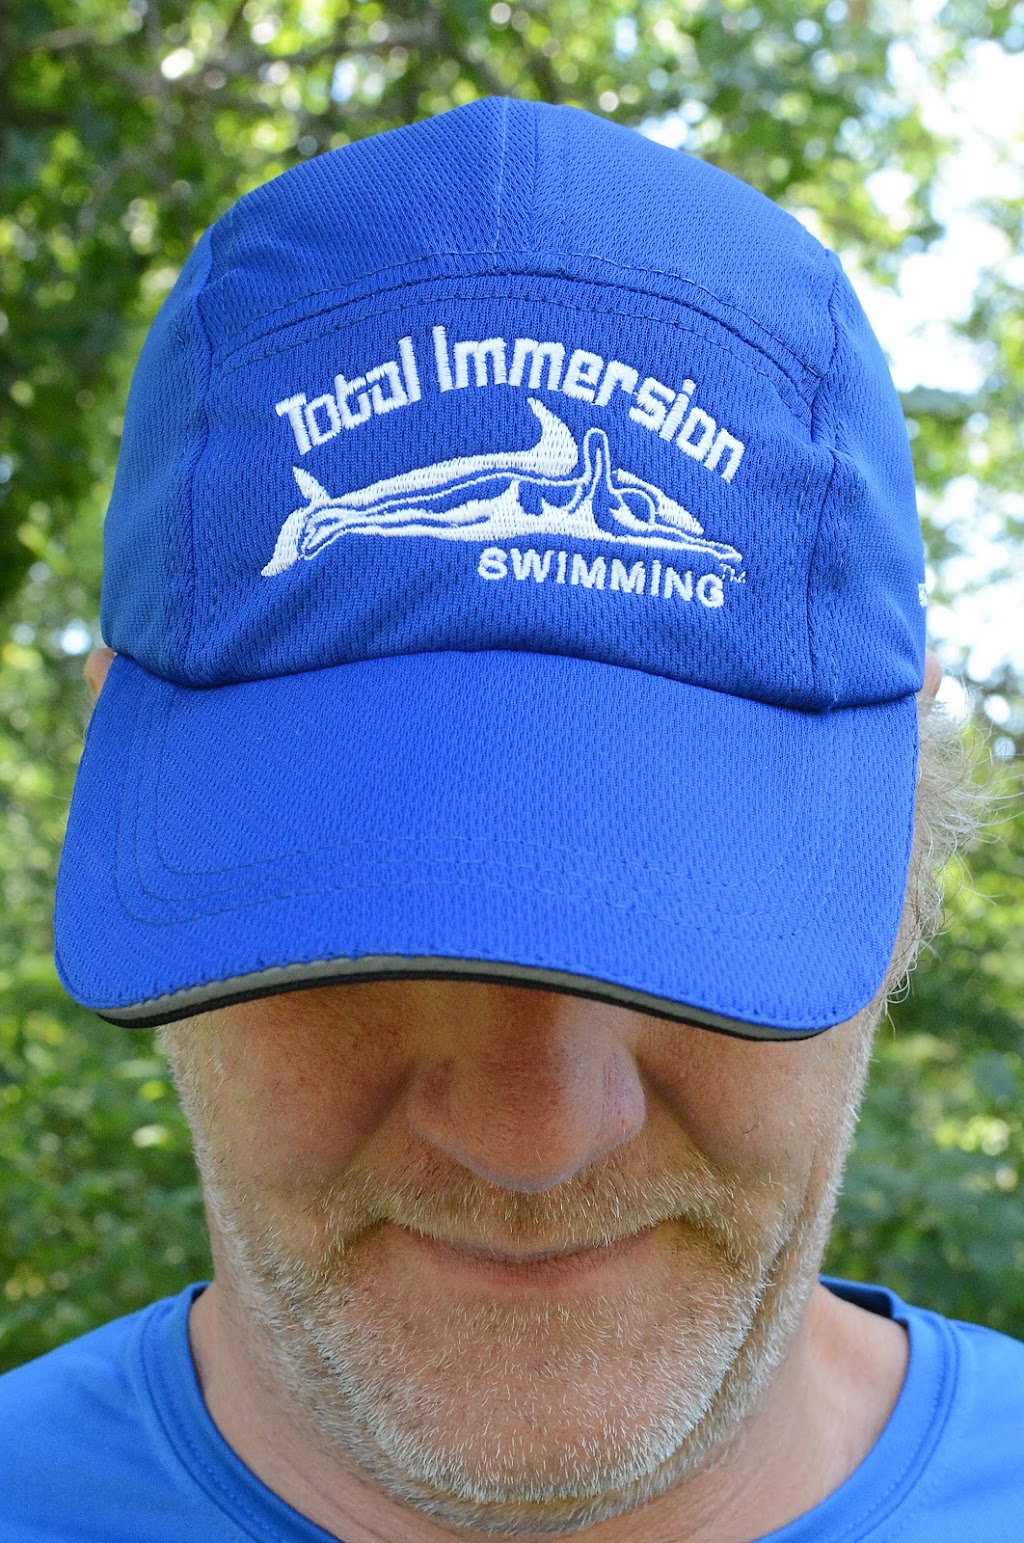 Total Immersion Swimming Inc | 37 Kleinekill Dr, New Paltz, NY 12561 | Phone: (914) 466-5956